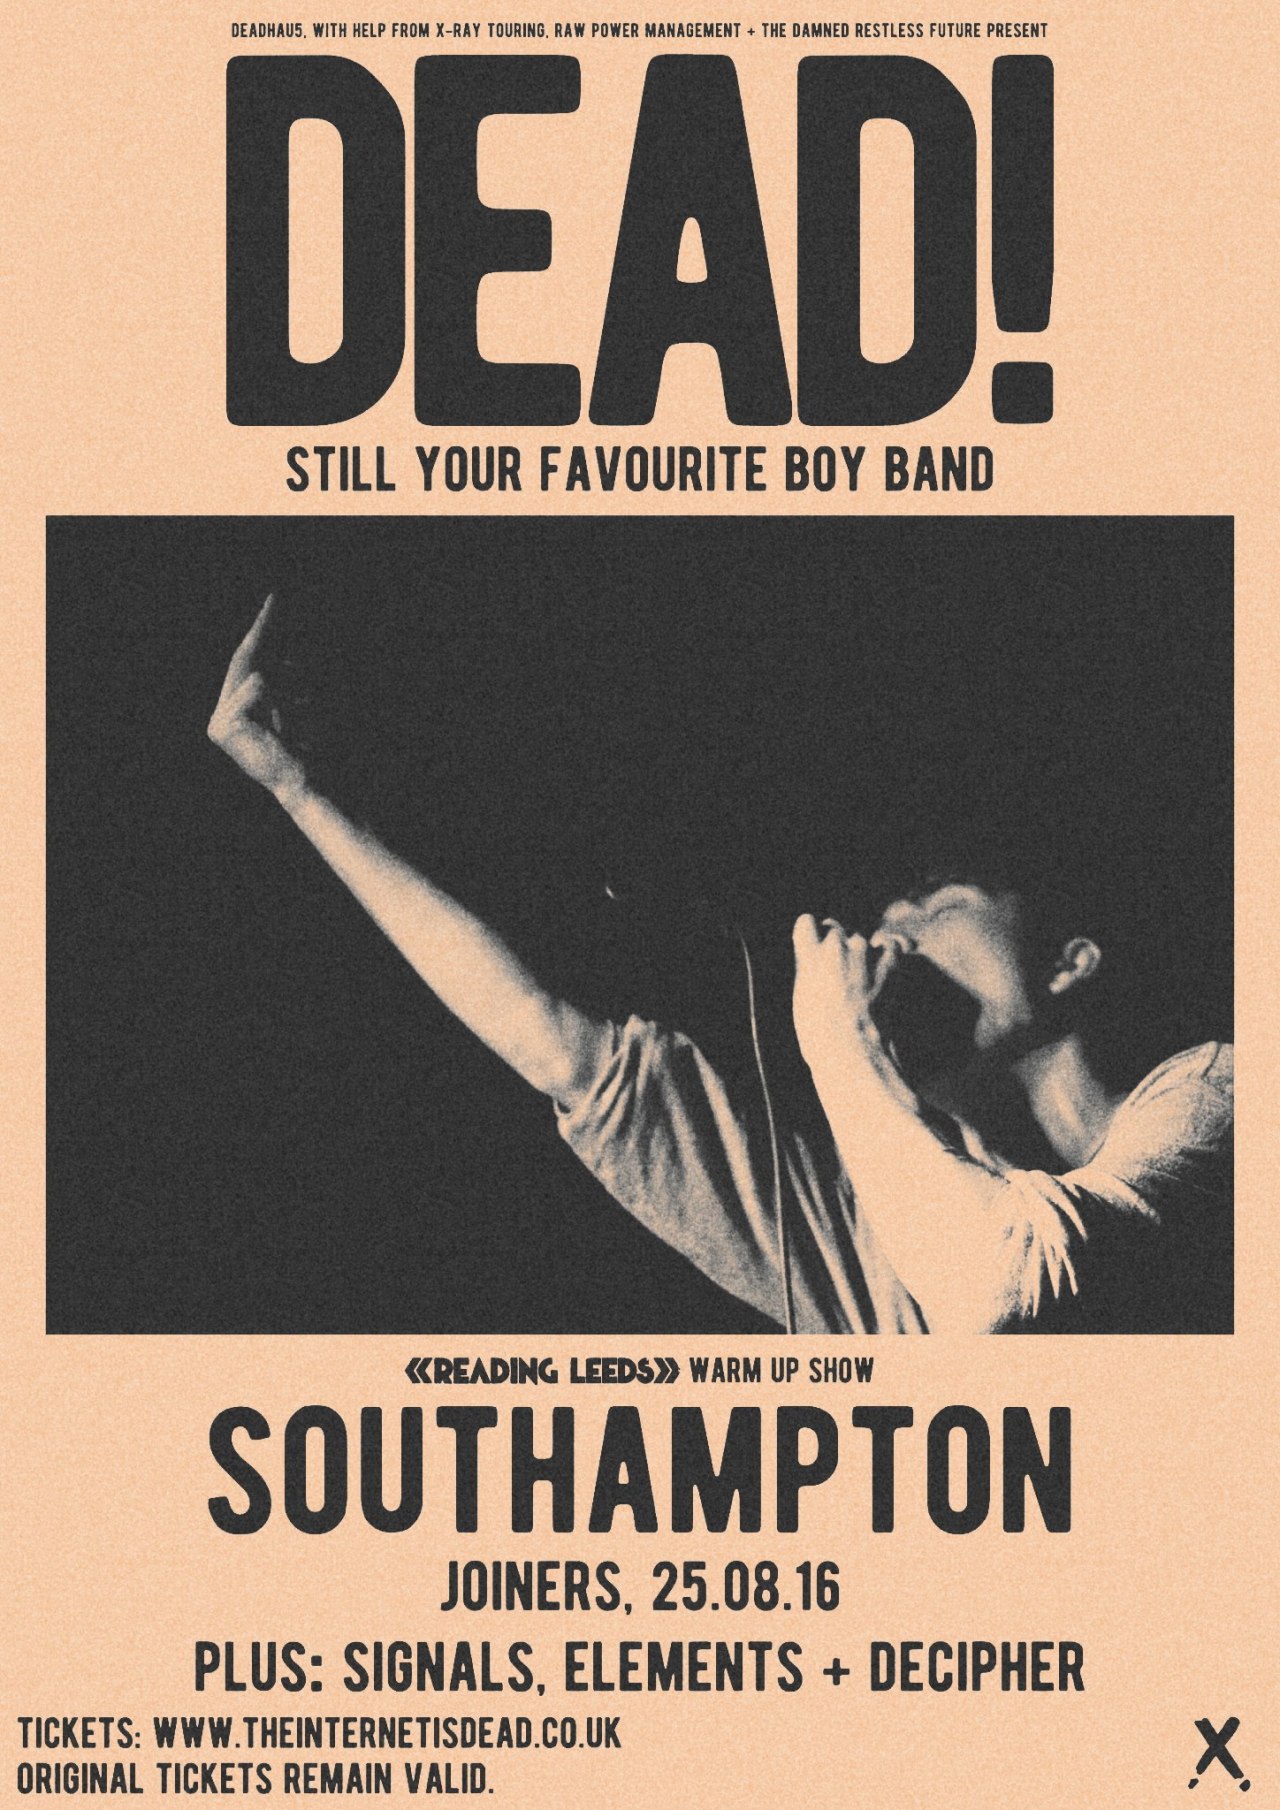 SOUTHAMPTON IS DEAD!Were coming back to Southampton for our first hometown headline show in over a year. What a great way to warm up for our biggest ever shows at Reading and Leeds. We have some great friends coming with us, so check out Signals,...